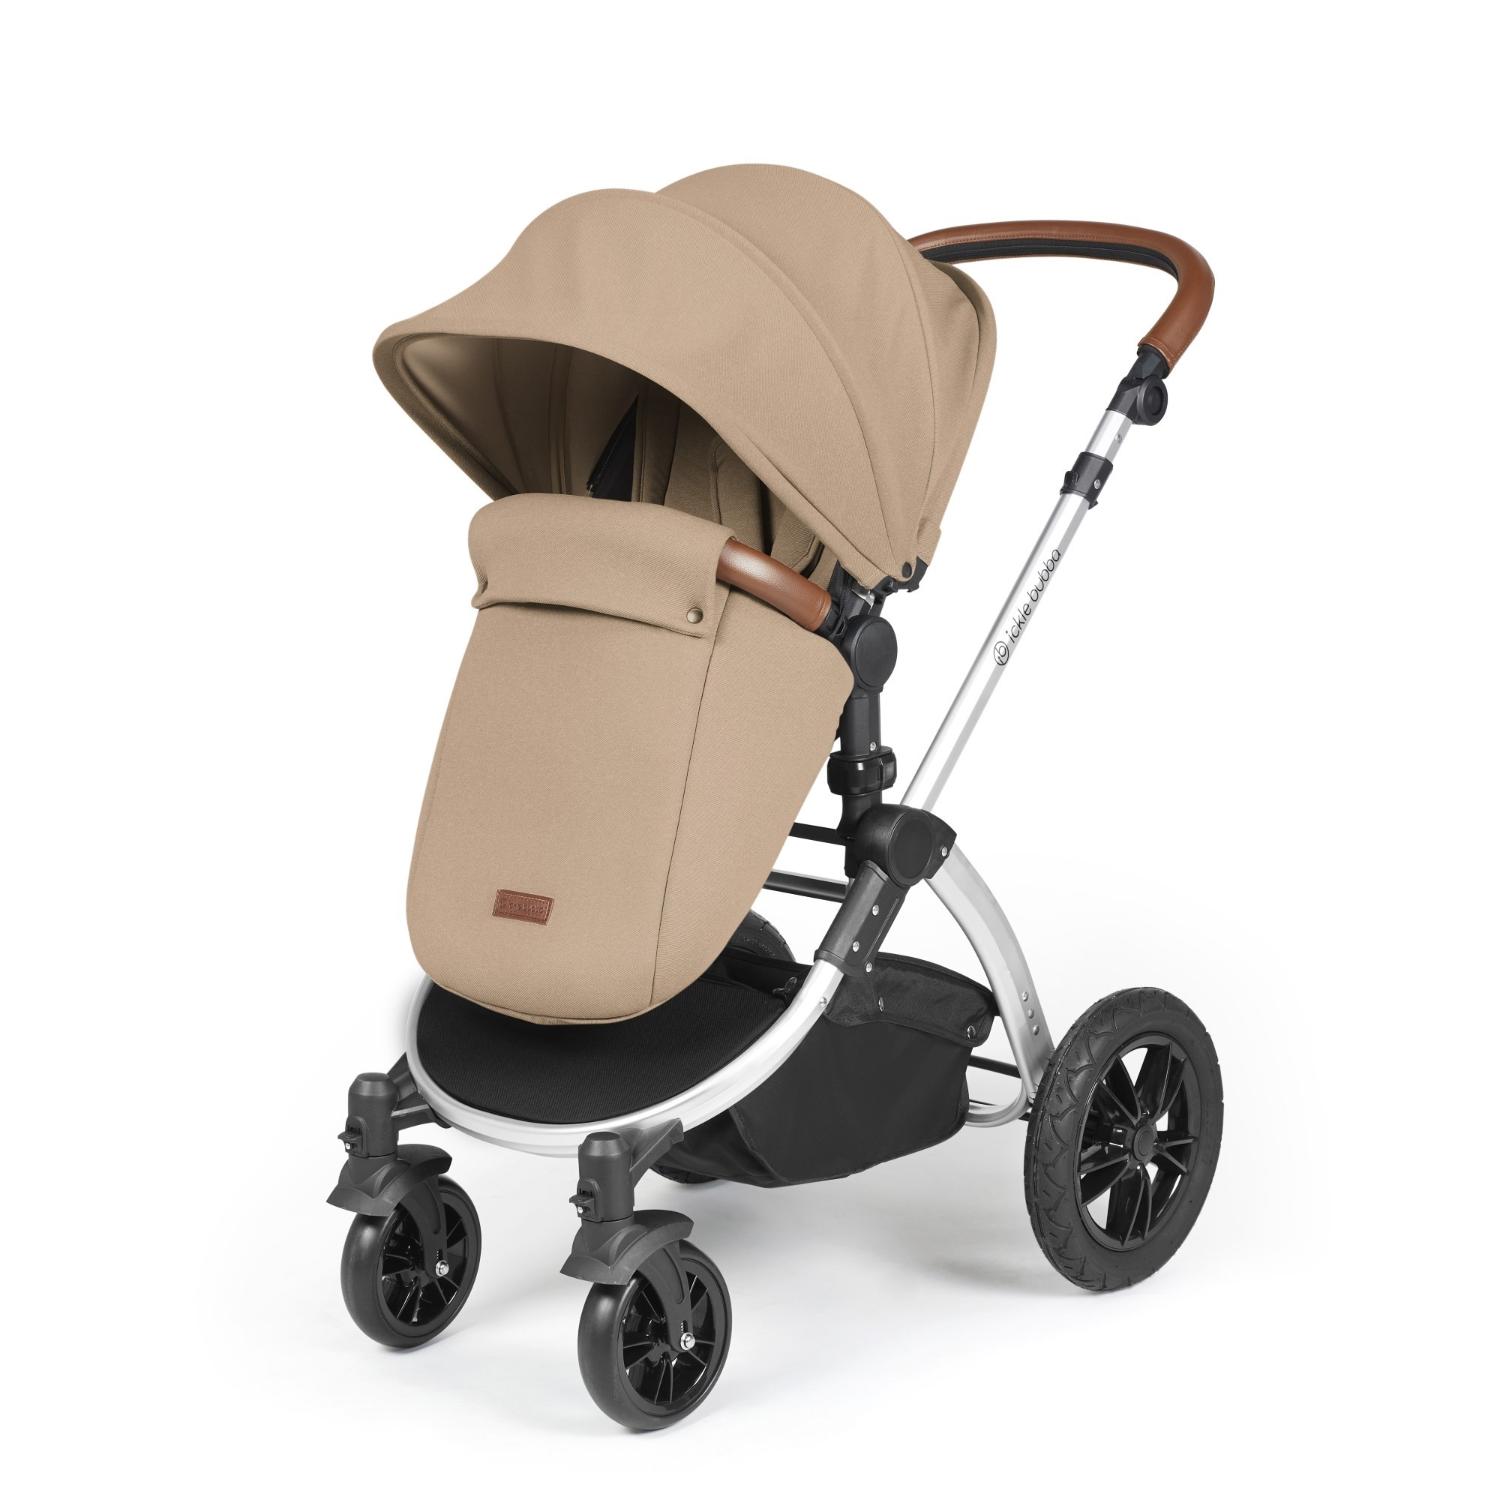 Ickle Bubba Stomp Luxe Pushchair with foot warmer attached in Desert beige colour with silver chassis and tan handle